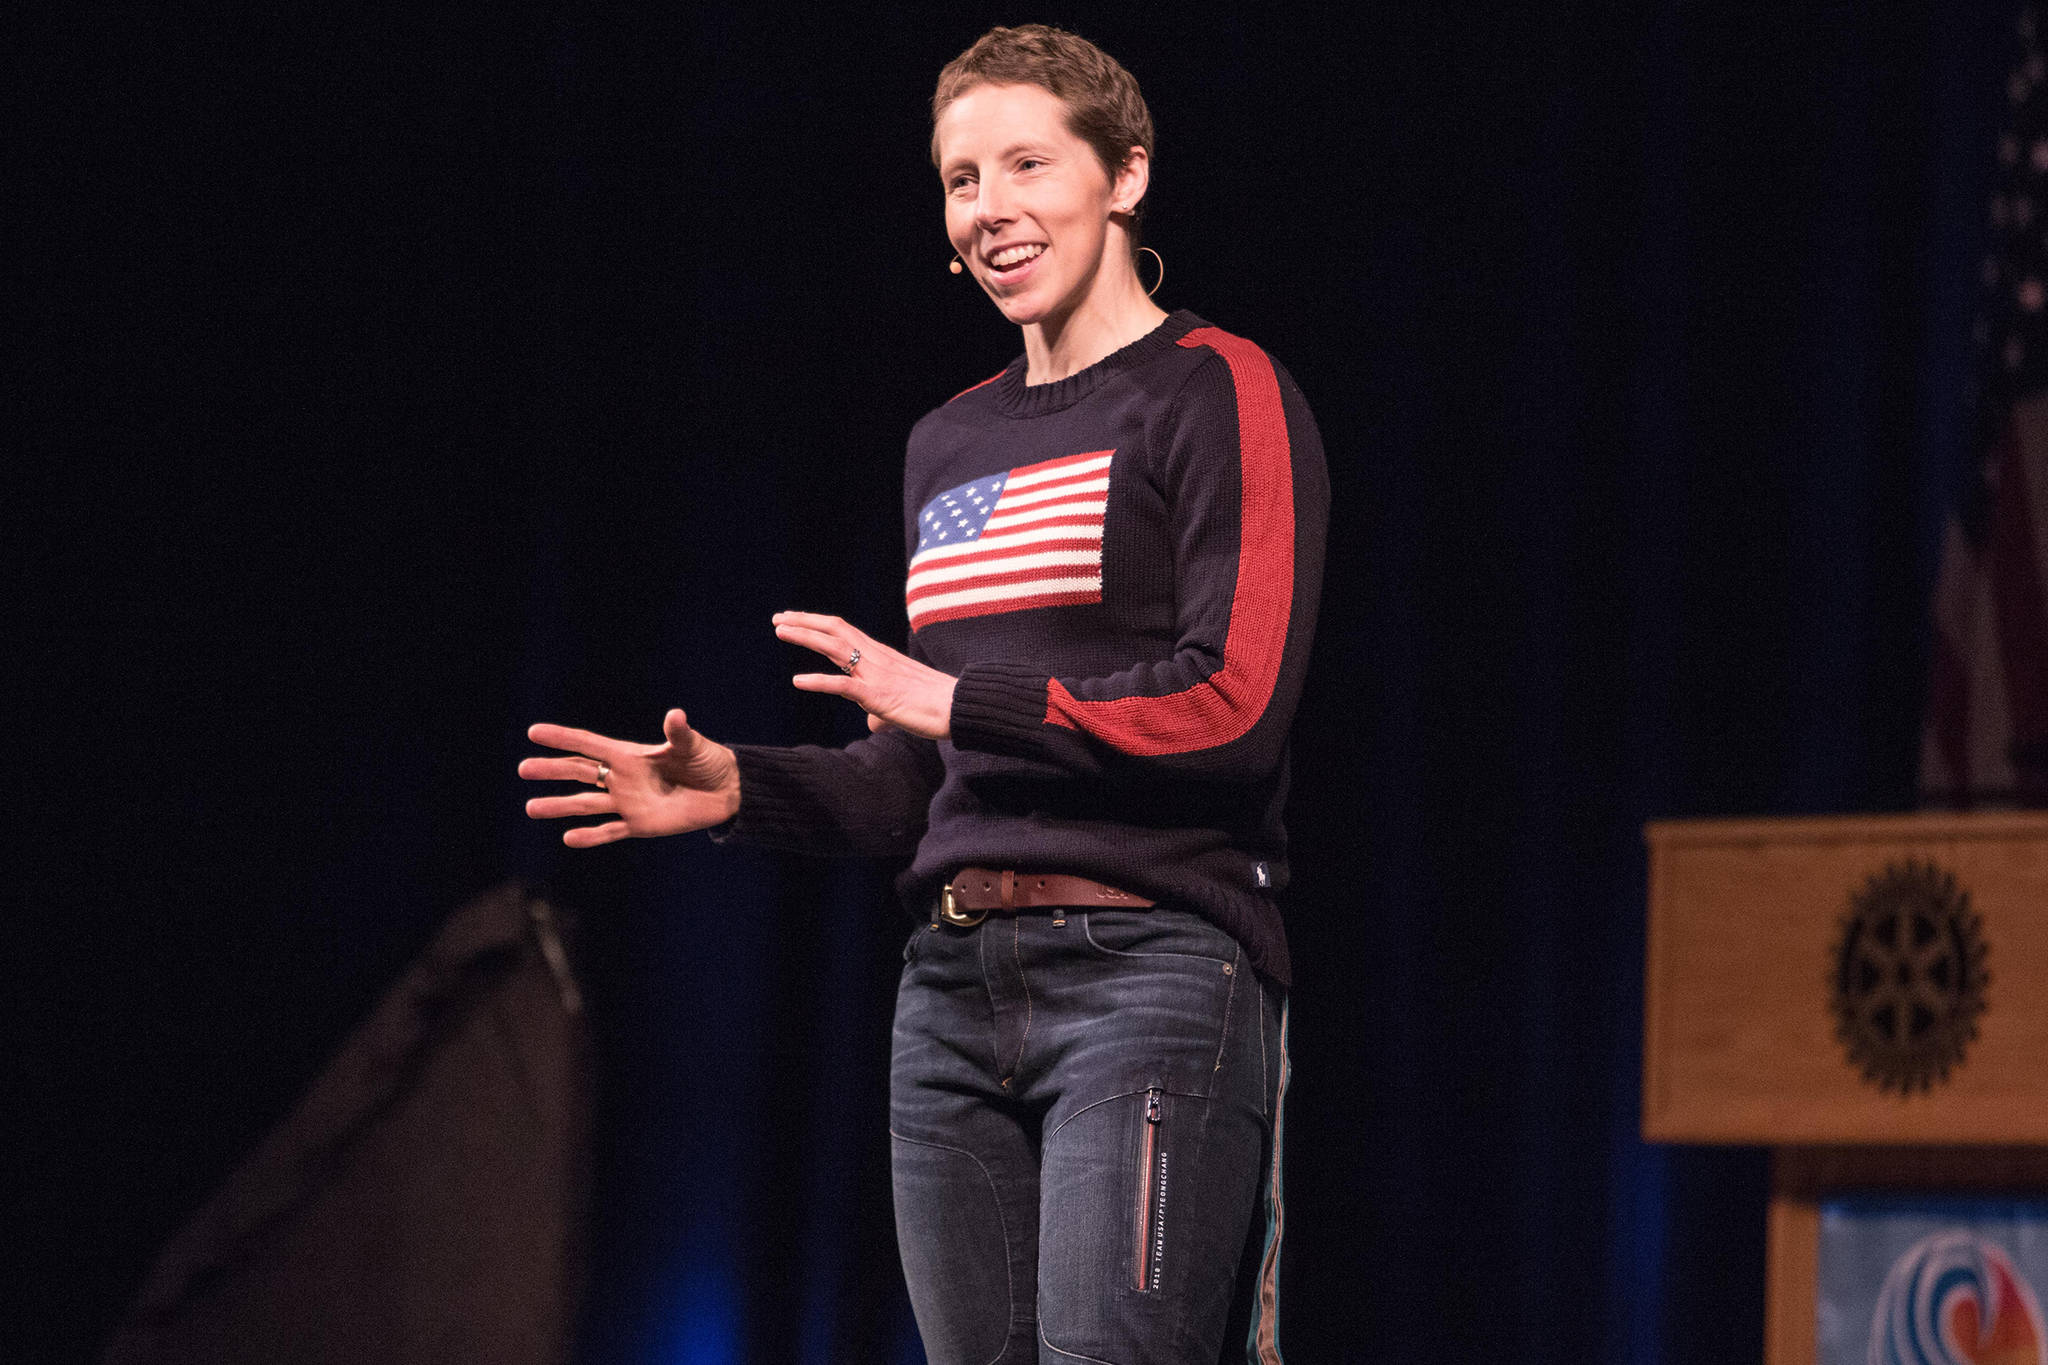 Kikkan Randall speaks at the 27th annual Pillars of America Speaker Series at Centennial Hall on Wednesday, May 1, 2019. (Courtesy Photo | Heather Holt)